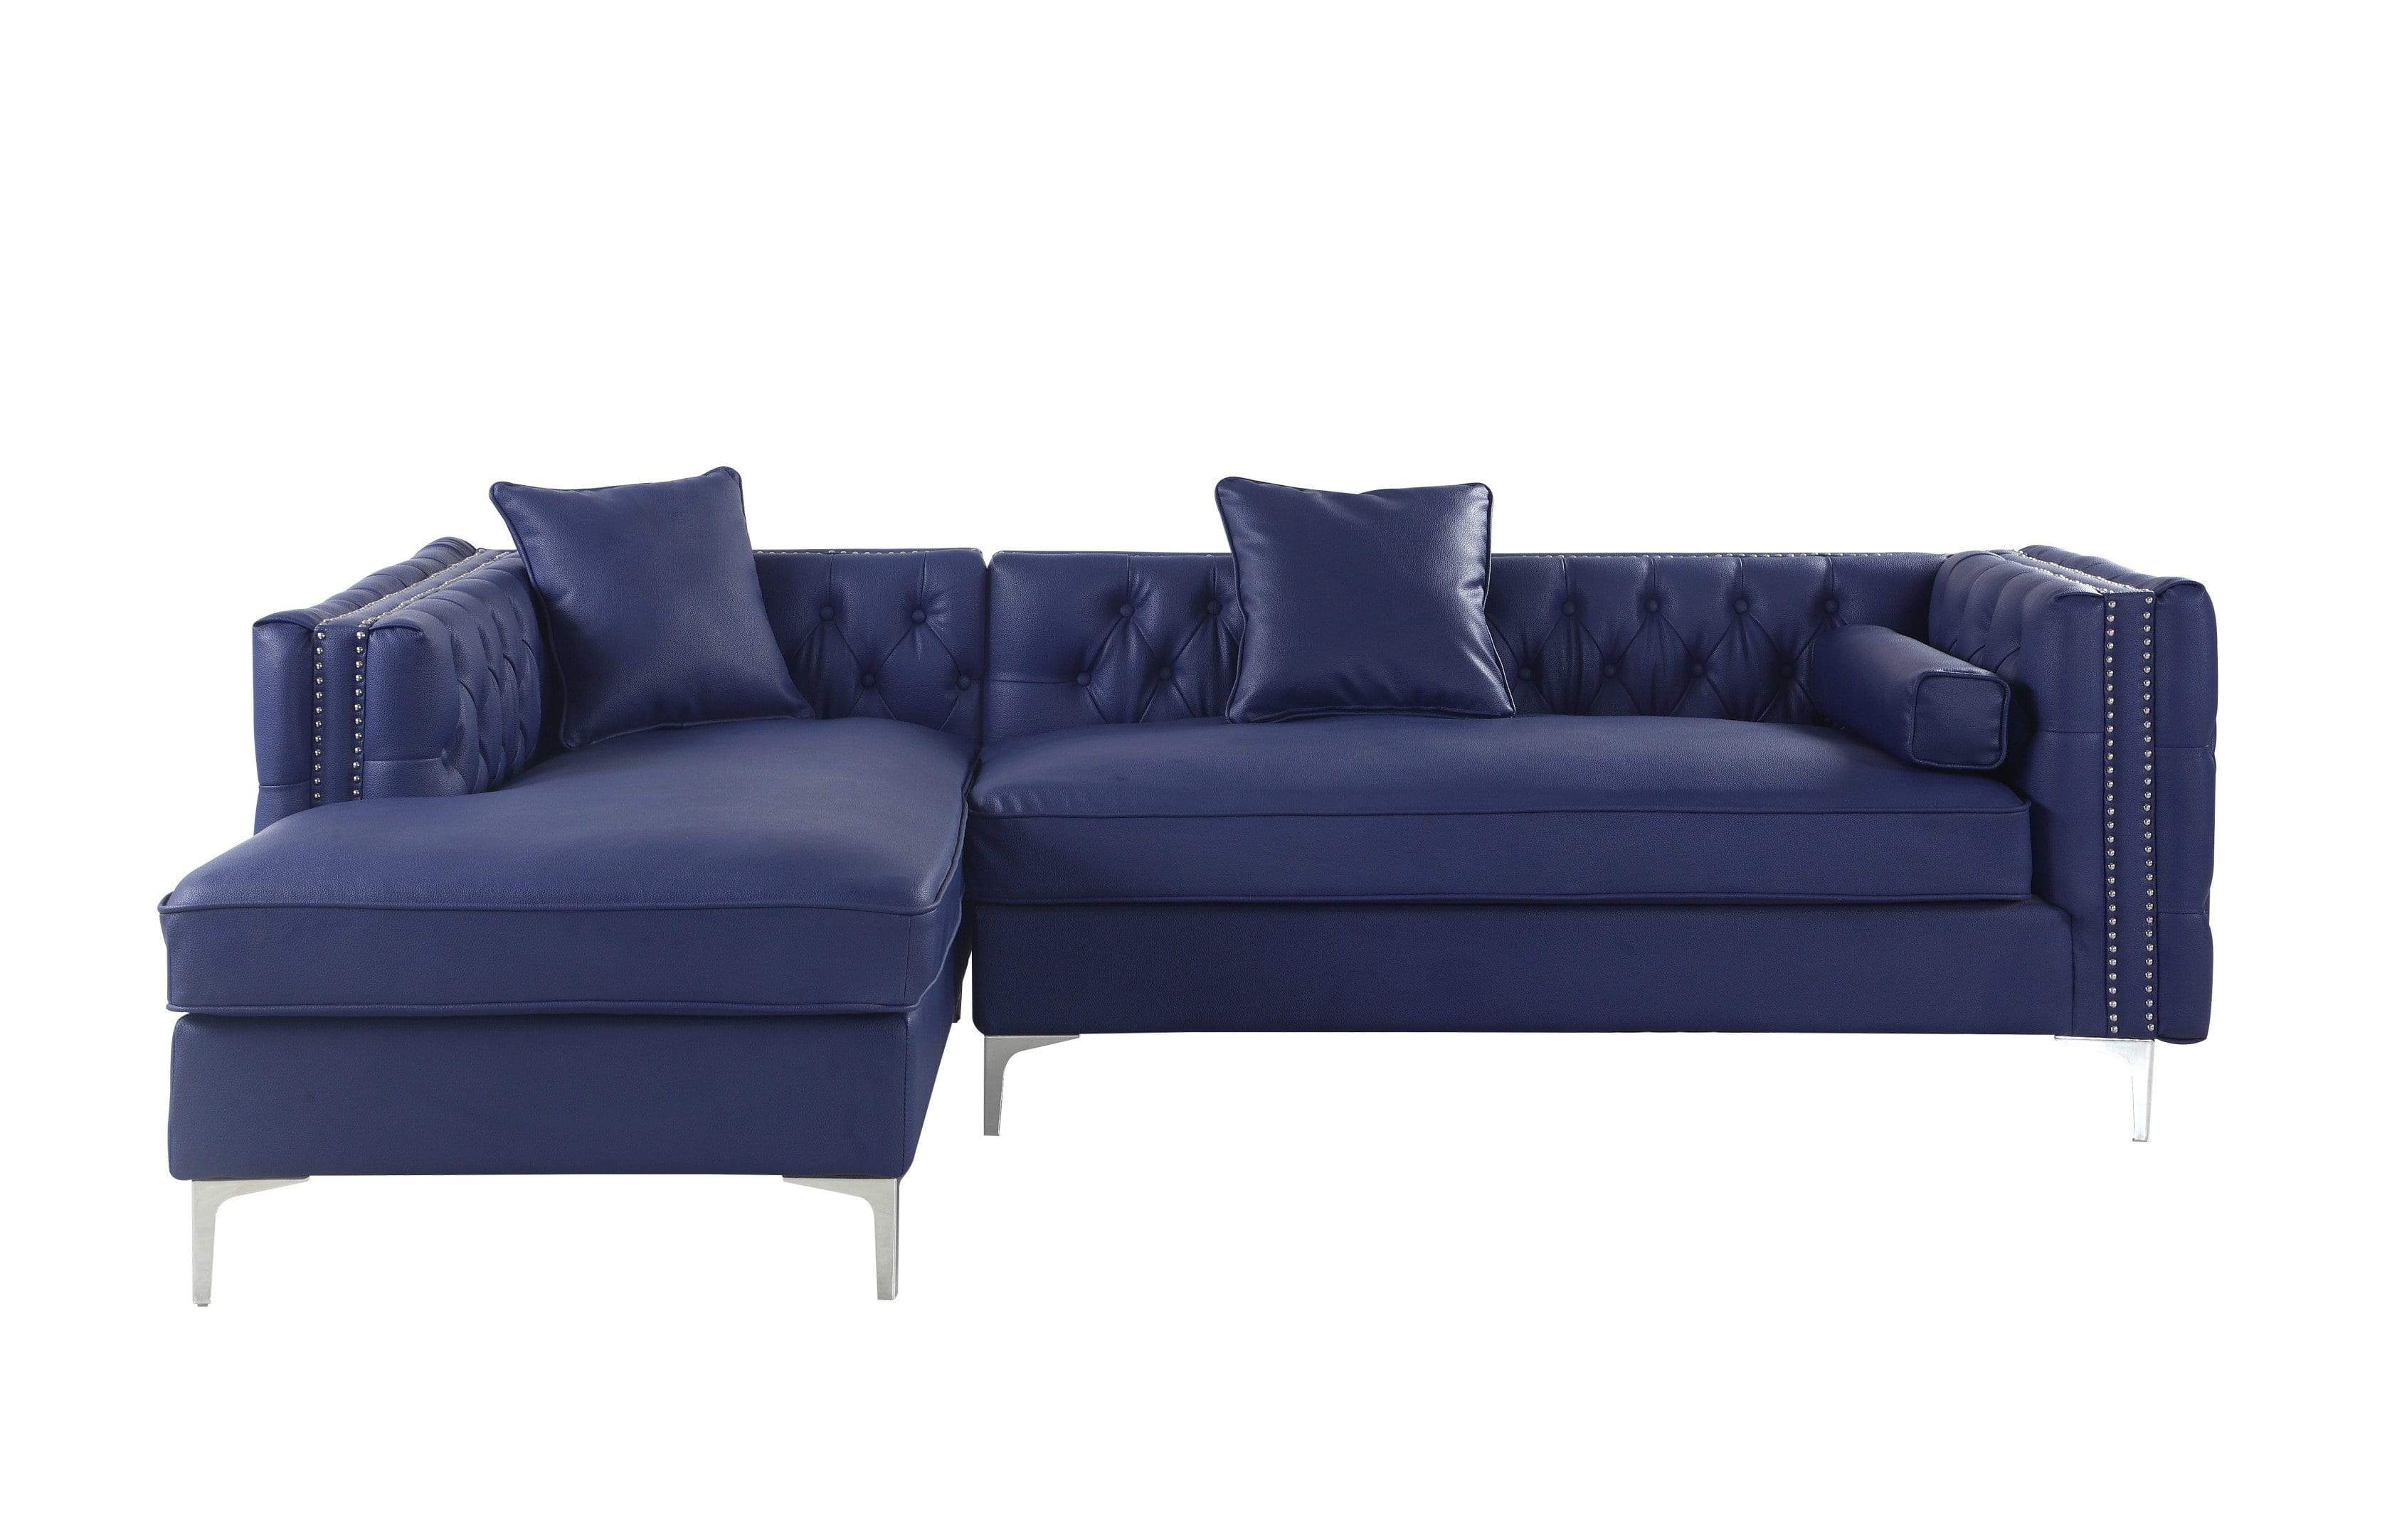 Monet Left Facing Tufted PU Leather Sectional Sofa